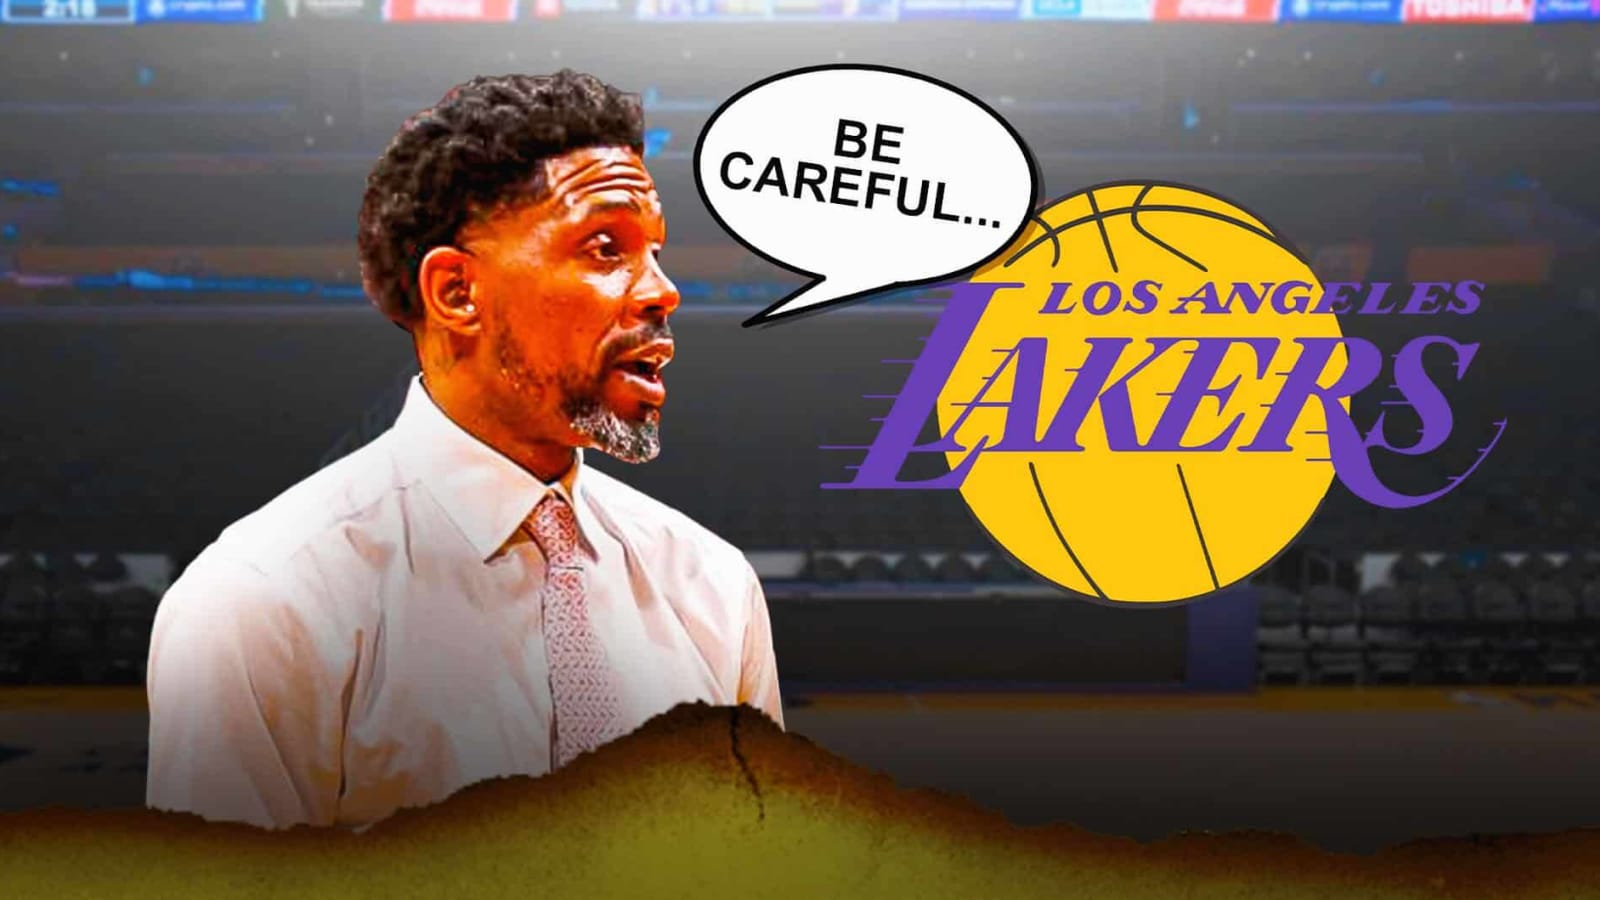 Lakers’ Udonis Haslem issues LeBron James-level warning to LA amid JJ redick interest